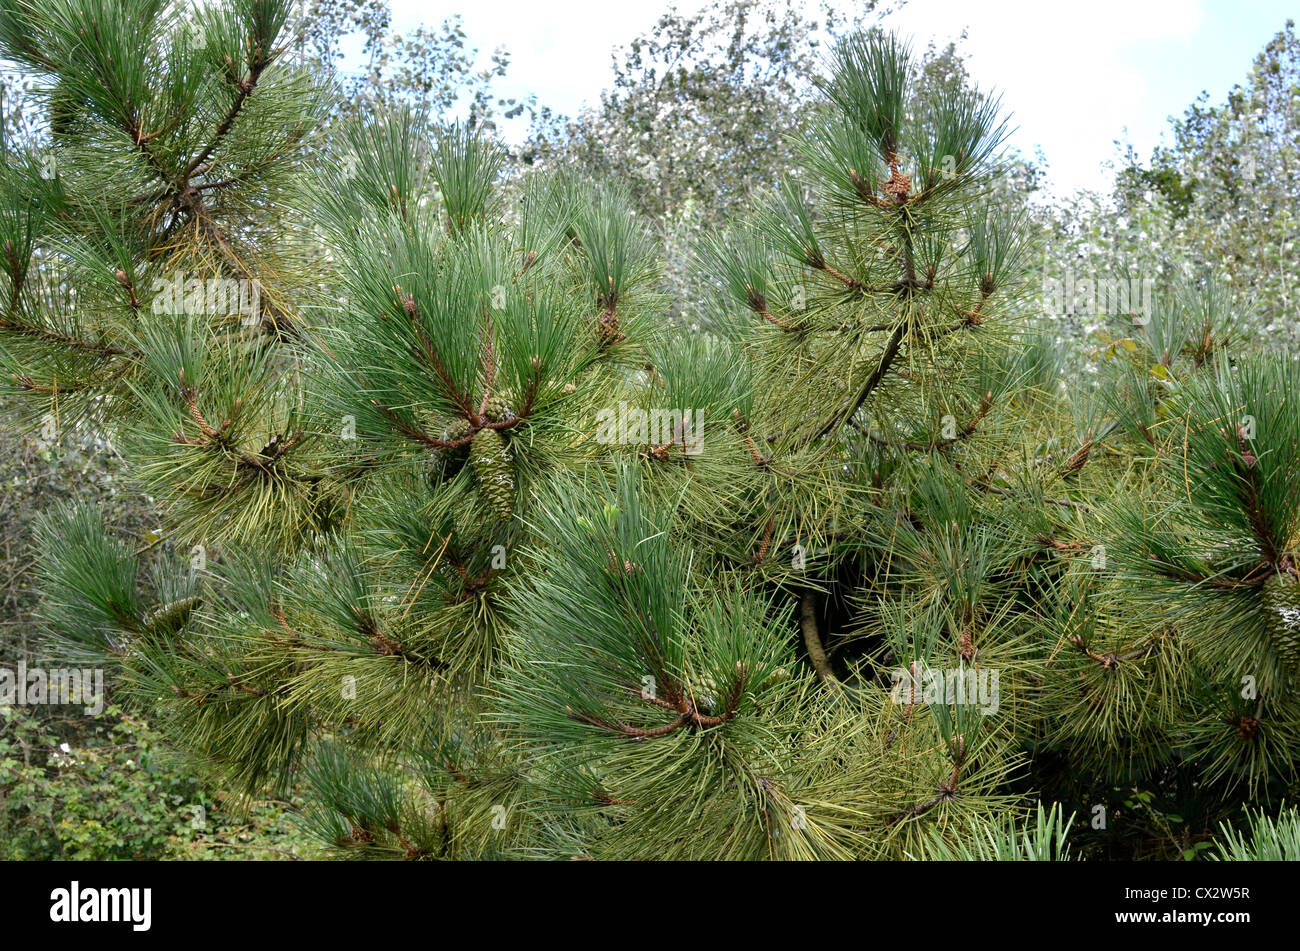 Foliage and pine cones of an old Monterey Pine / Pinus radiata against summer sky. In California, where it is a native, it is endangered. Stock Photo